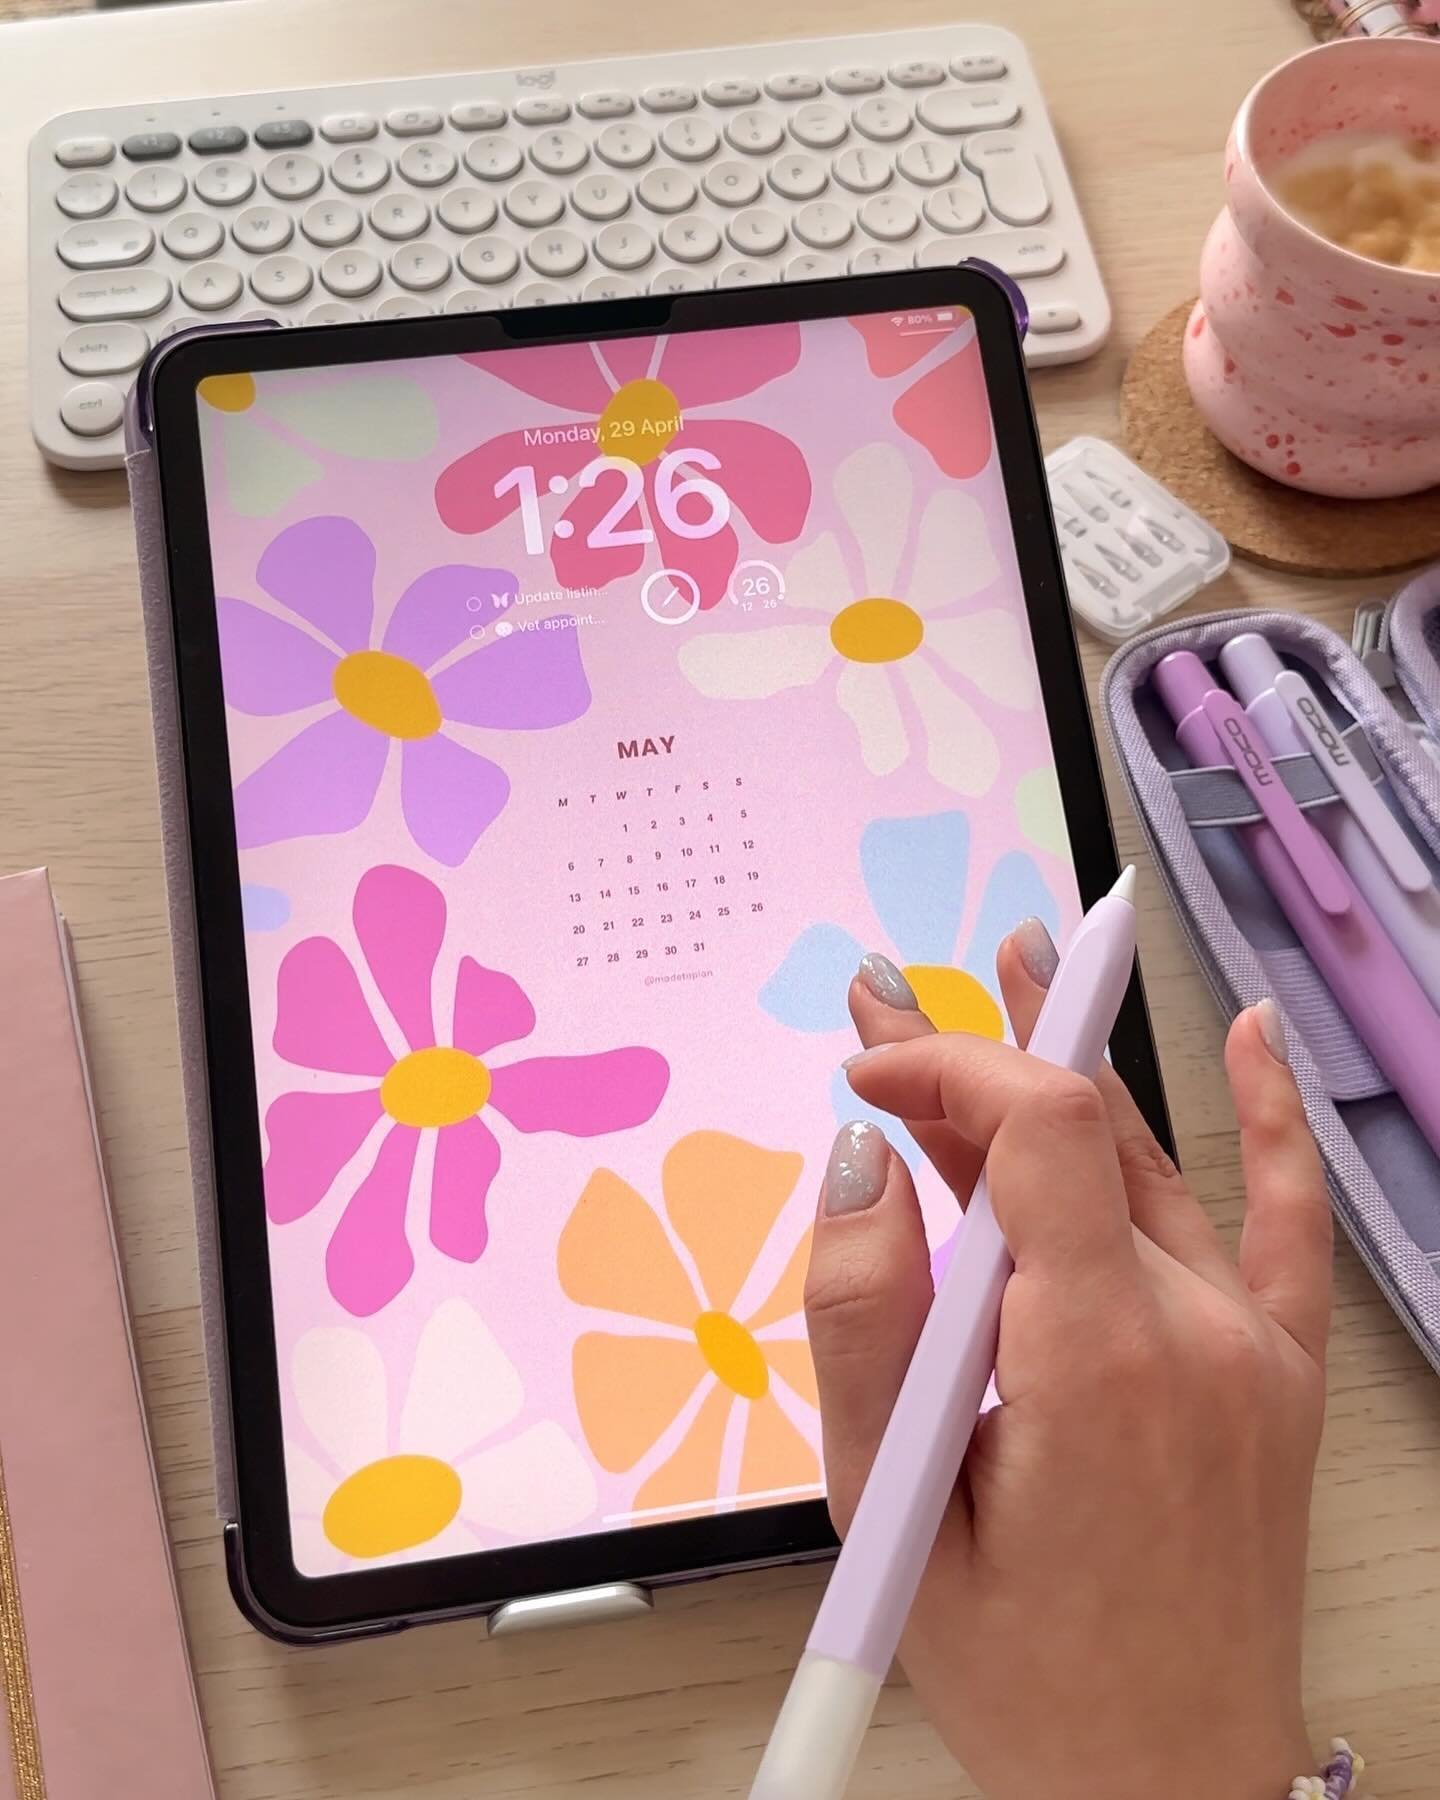 FREEBIES ALERT! ✏️😍🌸🍓🌱✨ - Pastel Sticky Notes, NEW pattern and aura wallpapers and May monthly planner are included with upcoming freebie pack! 🥰🤯

Free files are sent to everyone who subscribe and confirm to the newsletter 💌 (link in bio or D